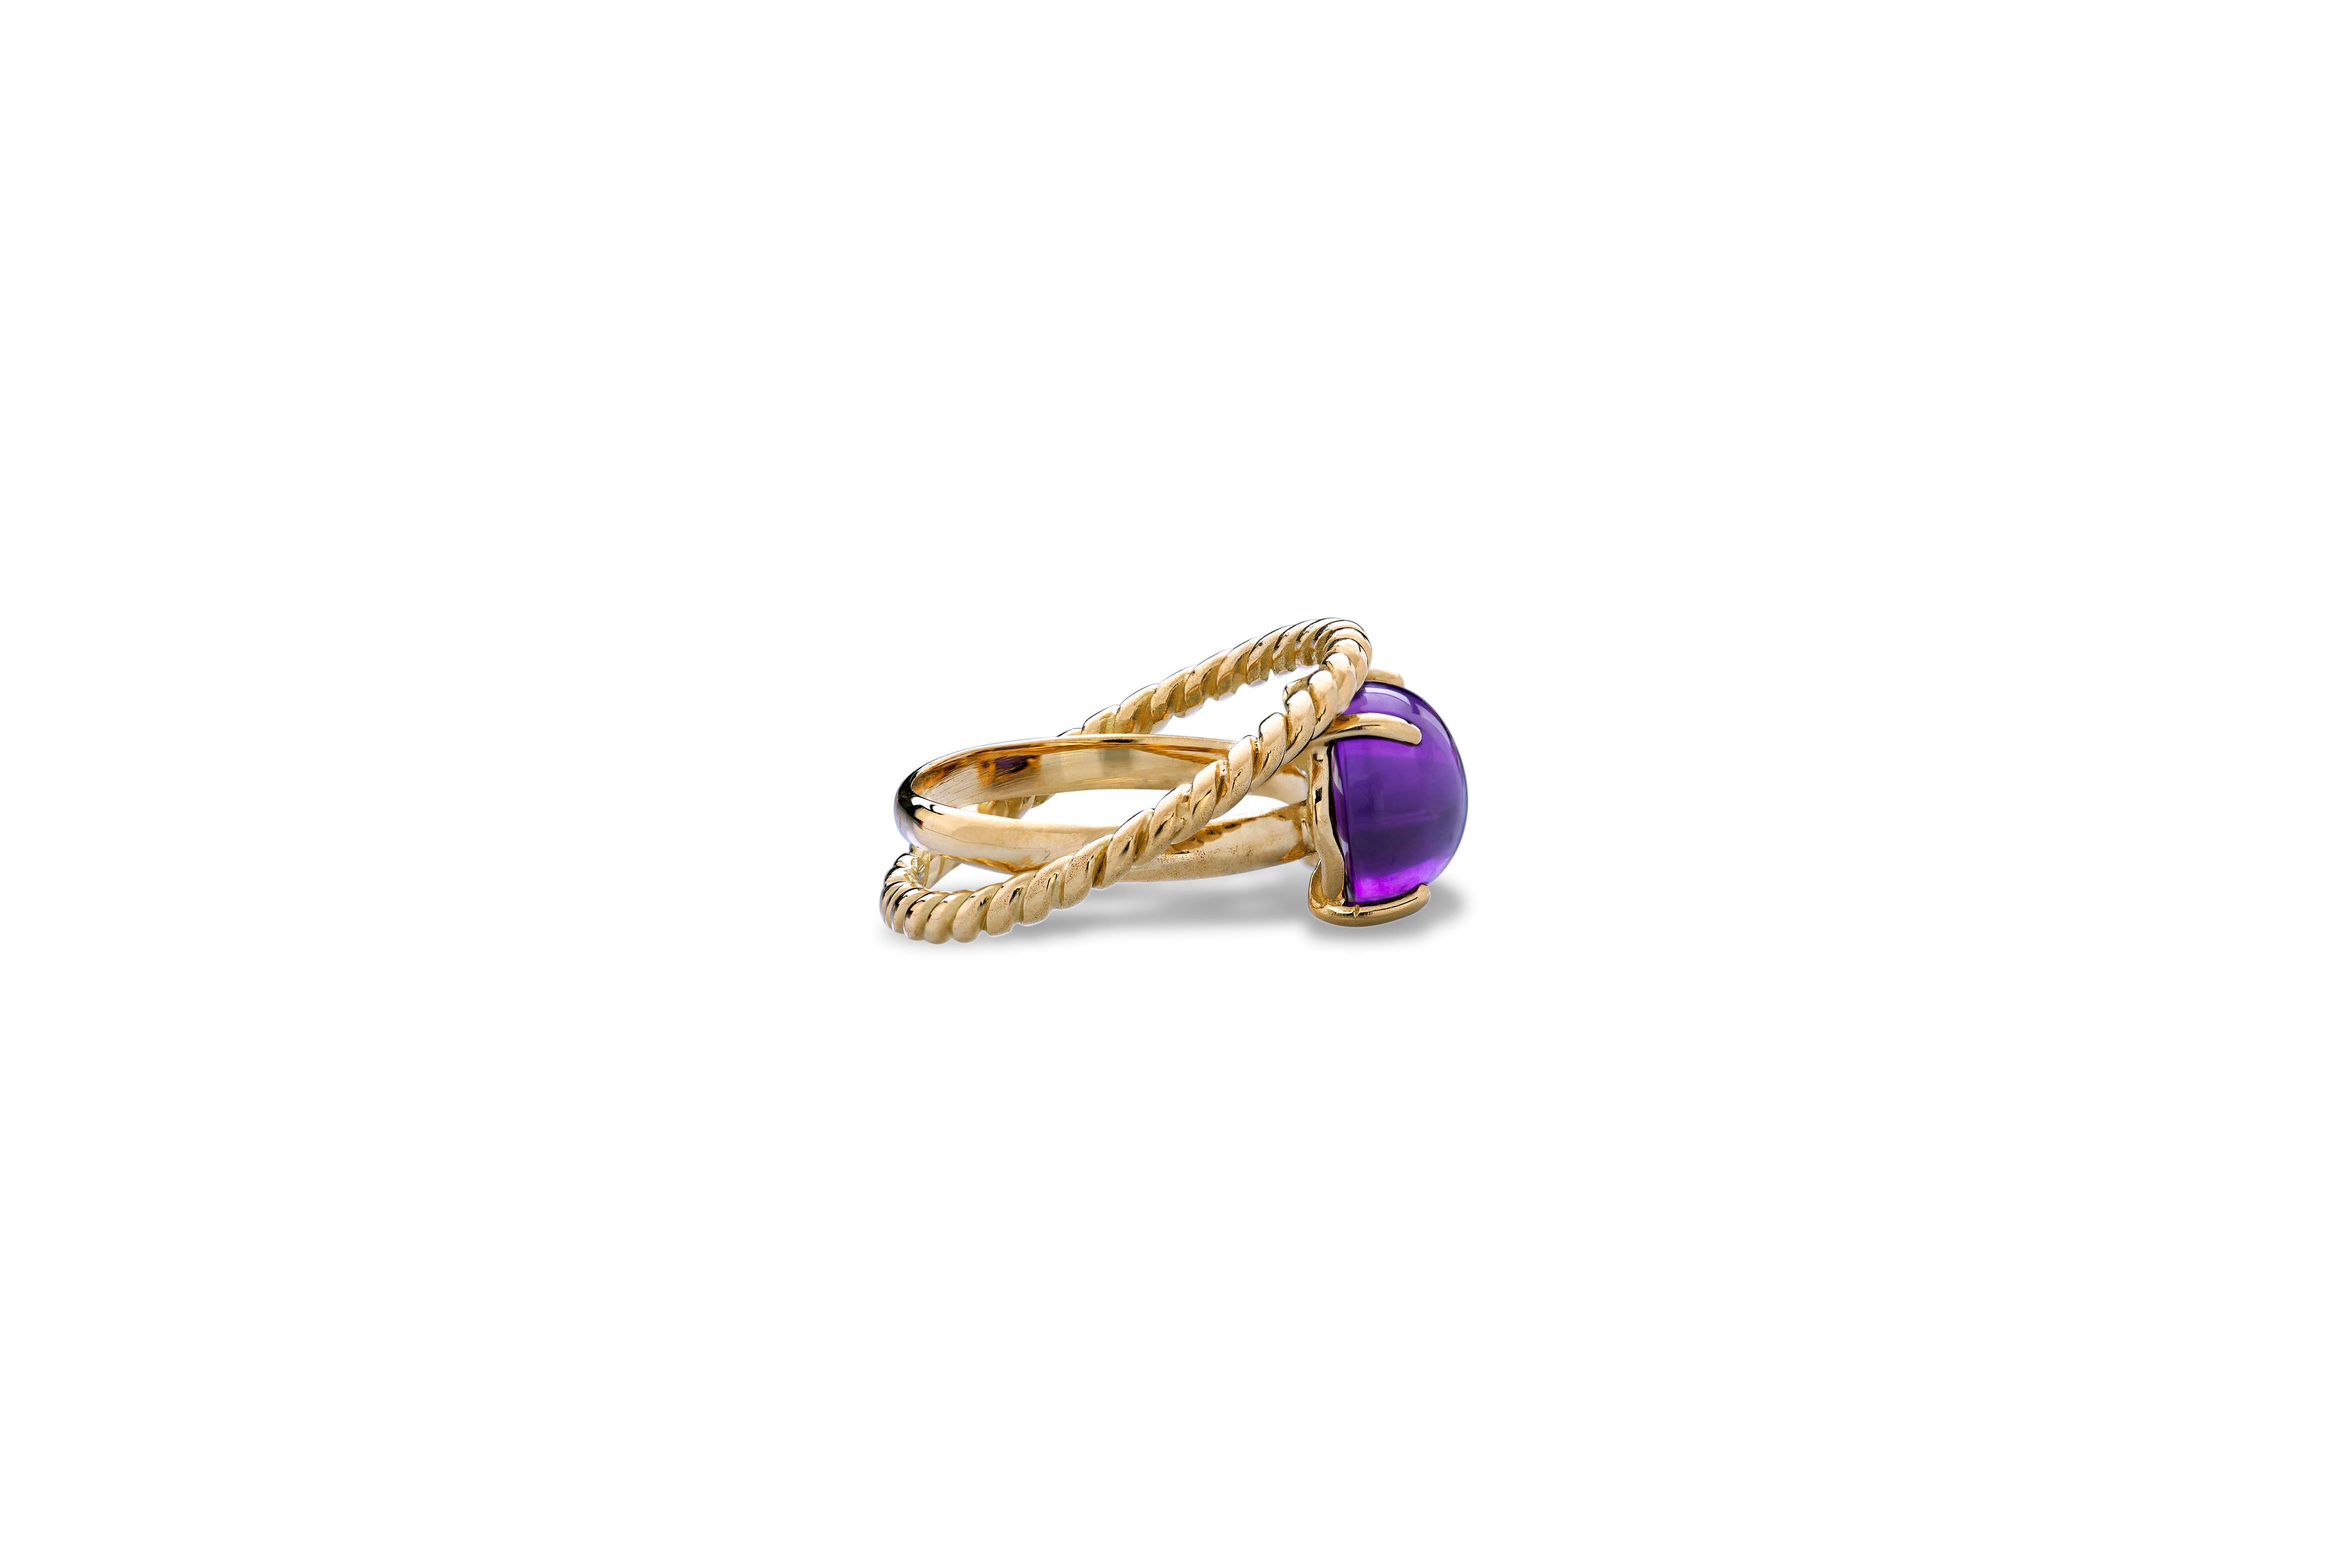 Modern 18 Karat Yellow Gold Twist Love Amethyst Handcrafted Design Ring.
This ring is handcrafted with two strips intertwined together in solid 18 karats yellow gold. 
A modern style design ring with an oval cabochon amethyst, inspired by the union